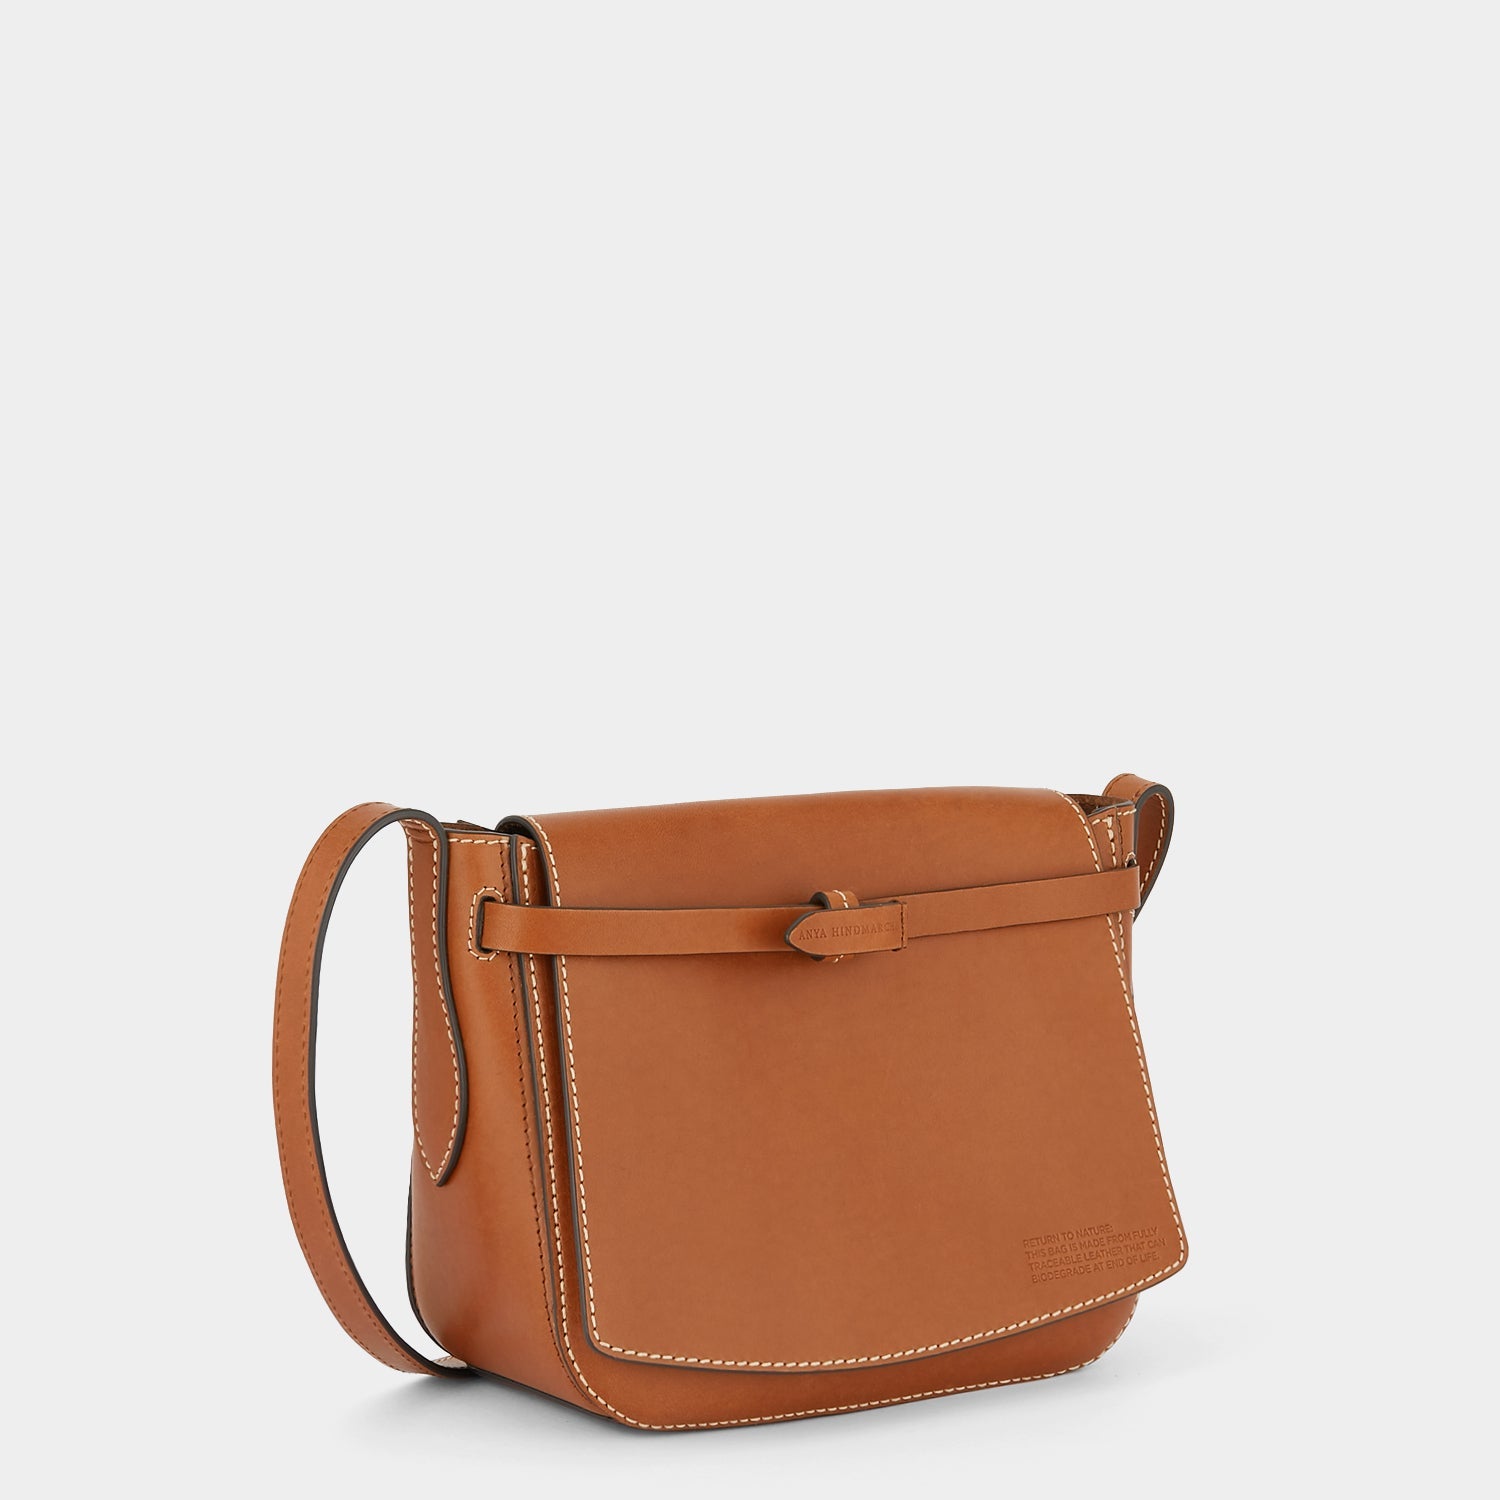 Return to Nature Cross-body -

                  
                    Compostable Leather in Tan -
                  

                  Anya Hindmarch US
